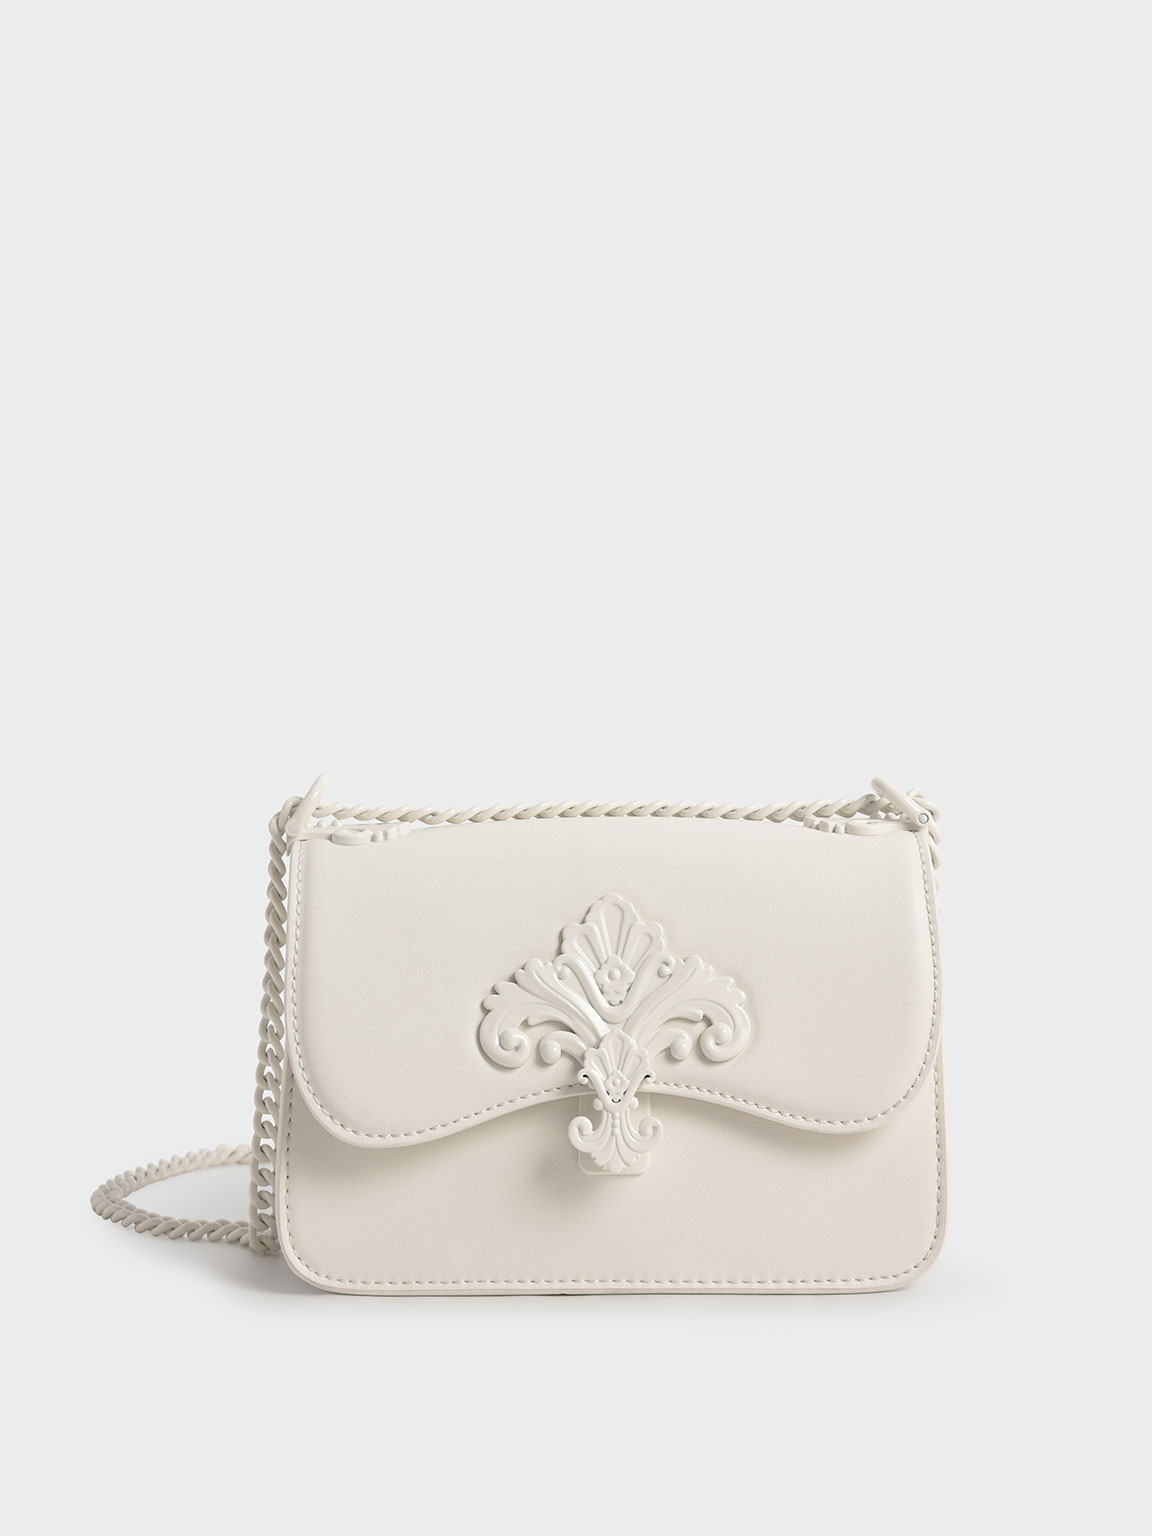 crossbody bag with chain strap